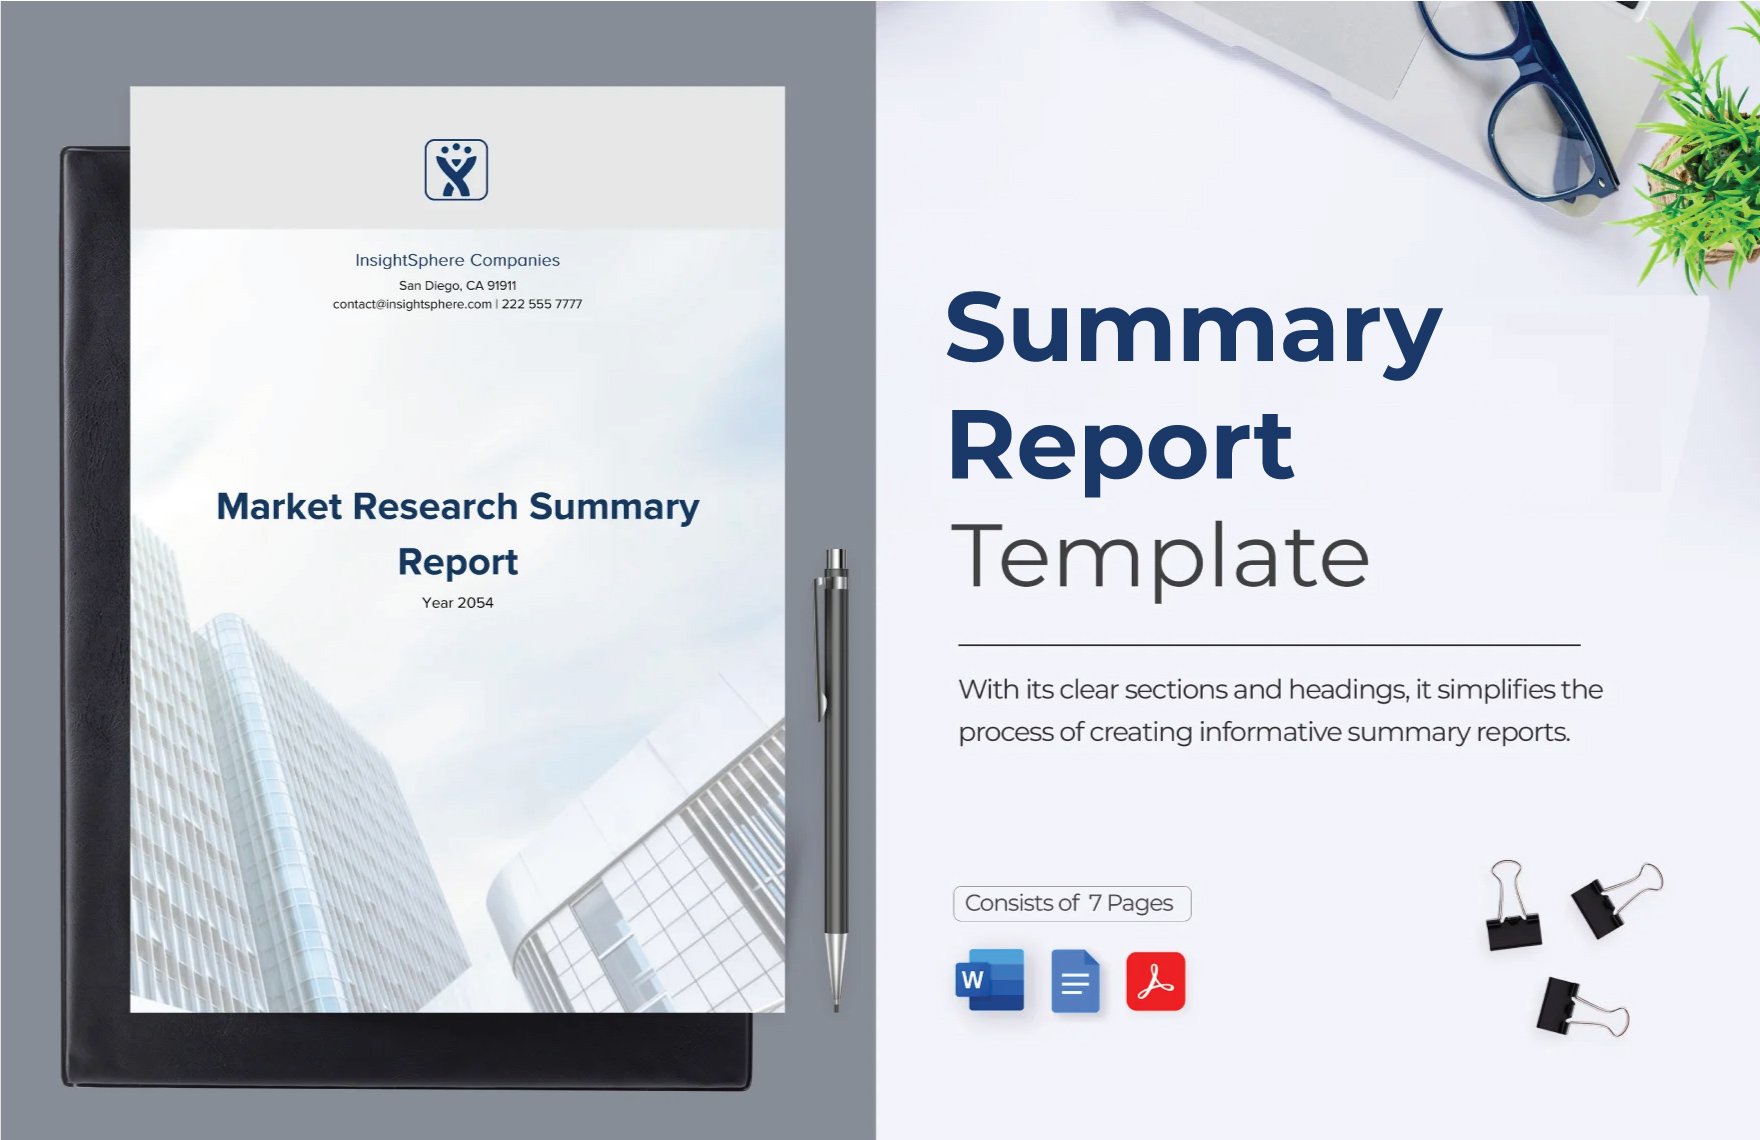 Free Summary Report Template in Word, Google Docs, PDF, InDesign